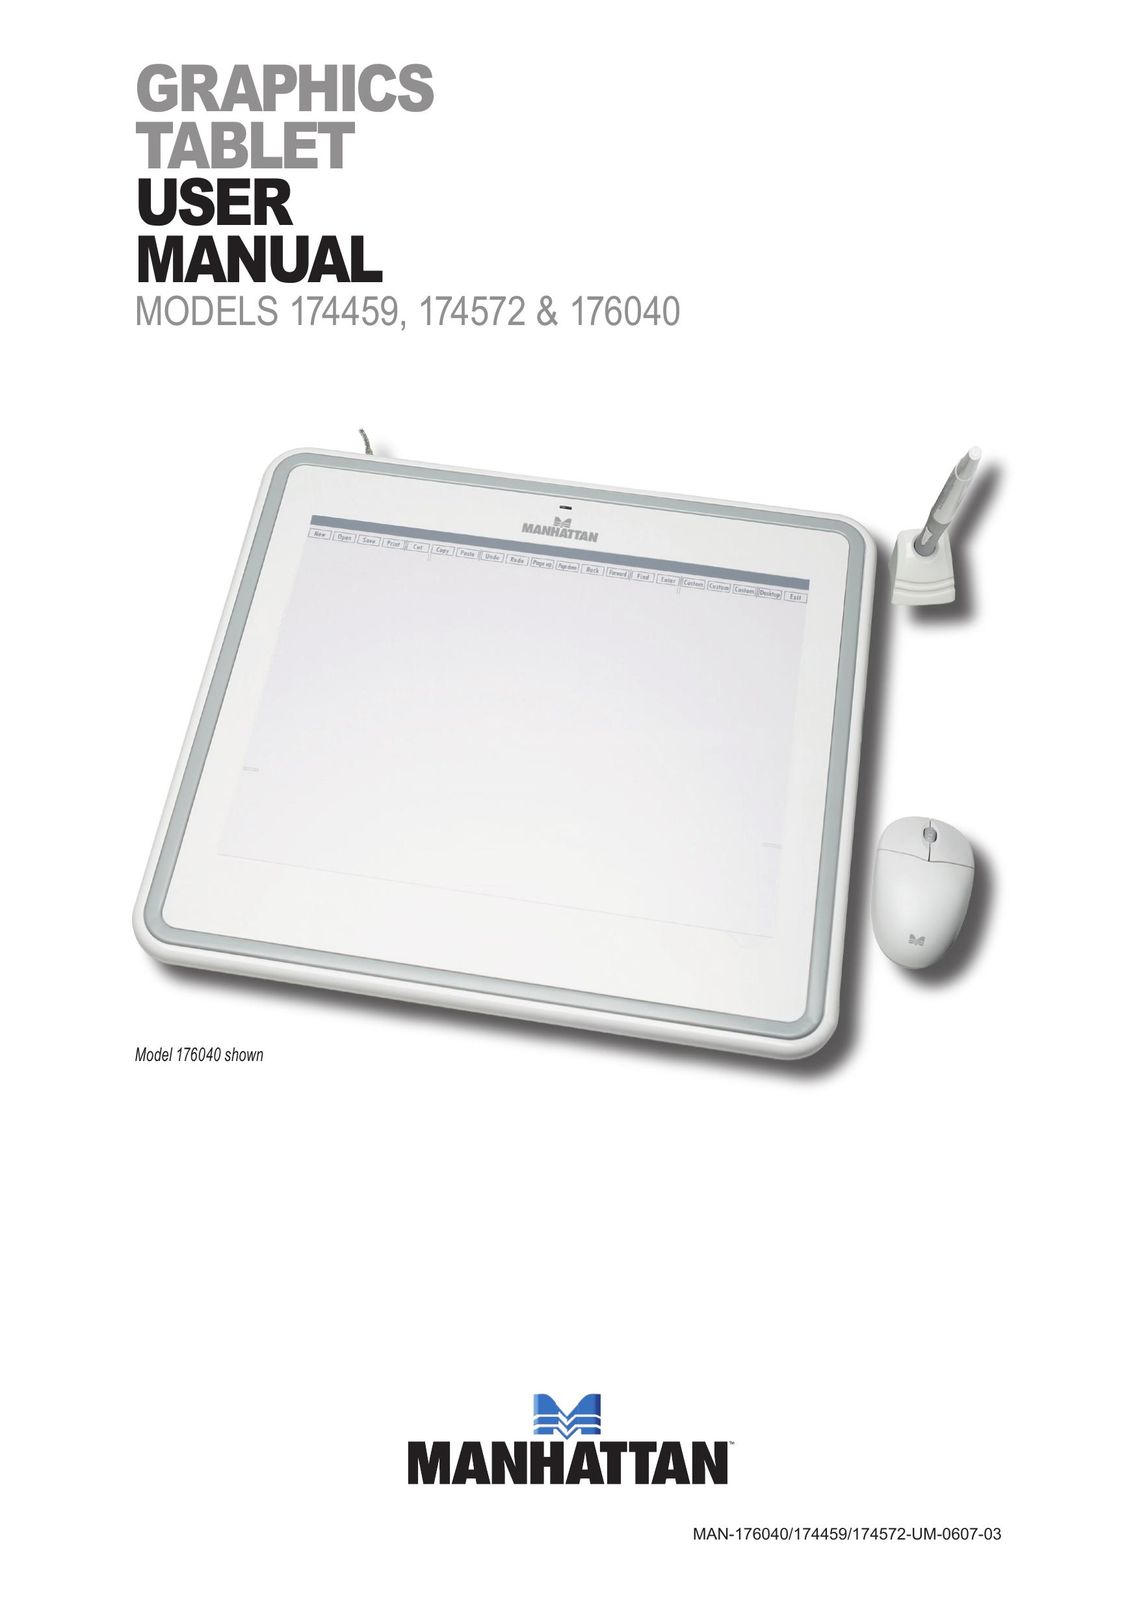 Manhattan Computer Products 174572 Graphics Tablet User Manual